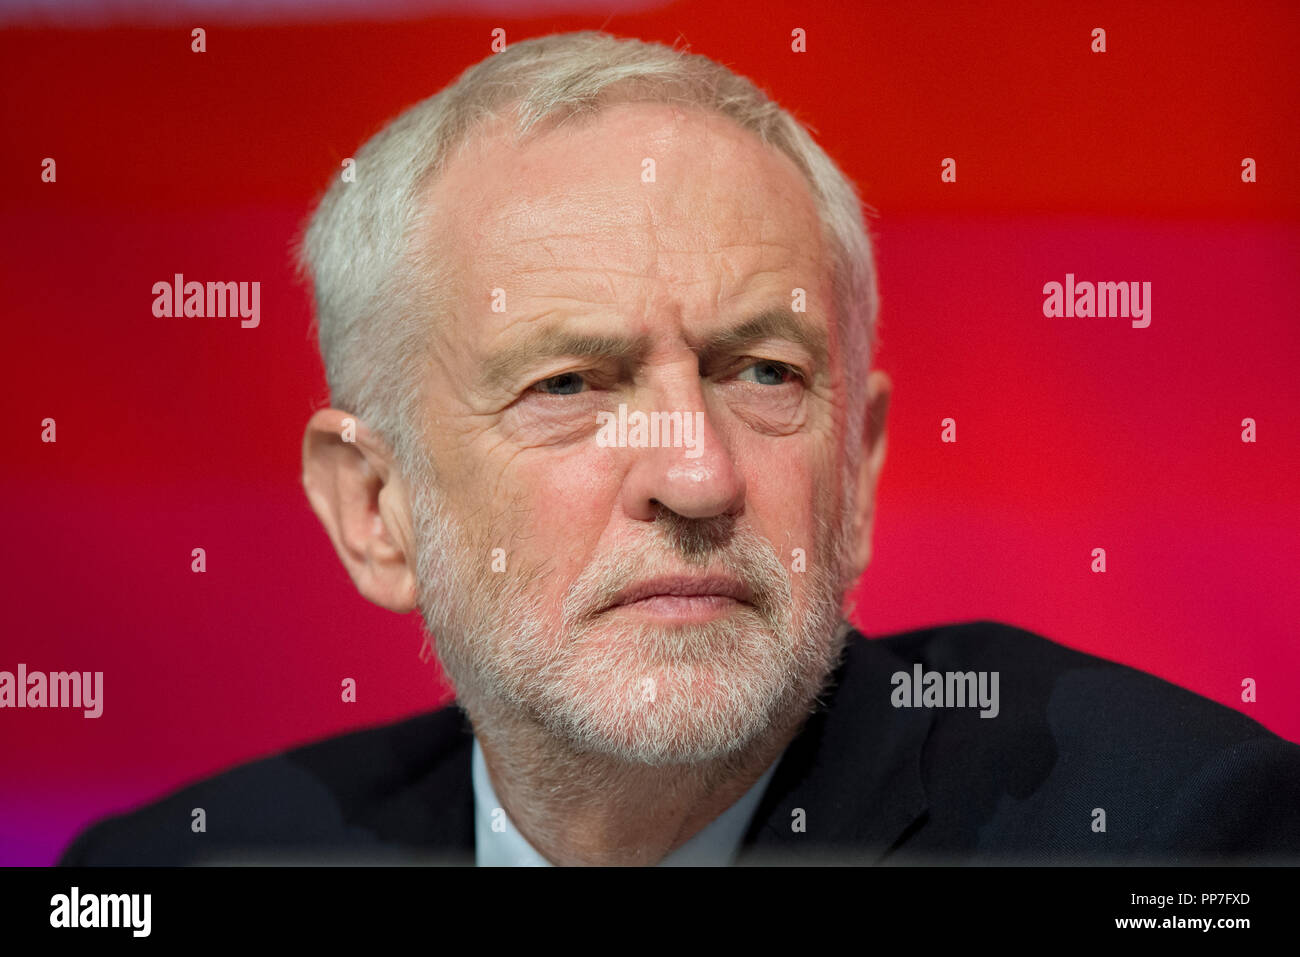 Liverpool, UK. 24th Sep, 2018. Jeremy Corbyn, Leader of the Opposition, Leader of the Labour Party and Labour MP for Islington North at the Labour Party Conference in Liverpool. Credit: Russell Hart/Alamy Live News Stock Photo